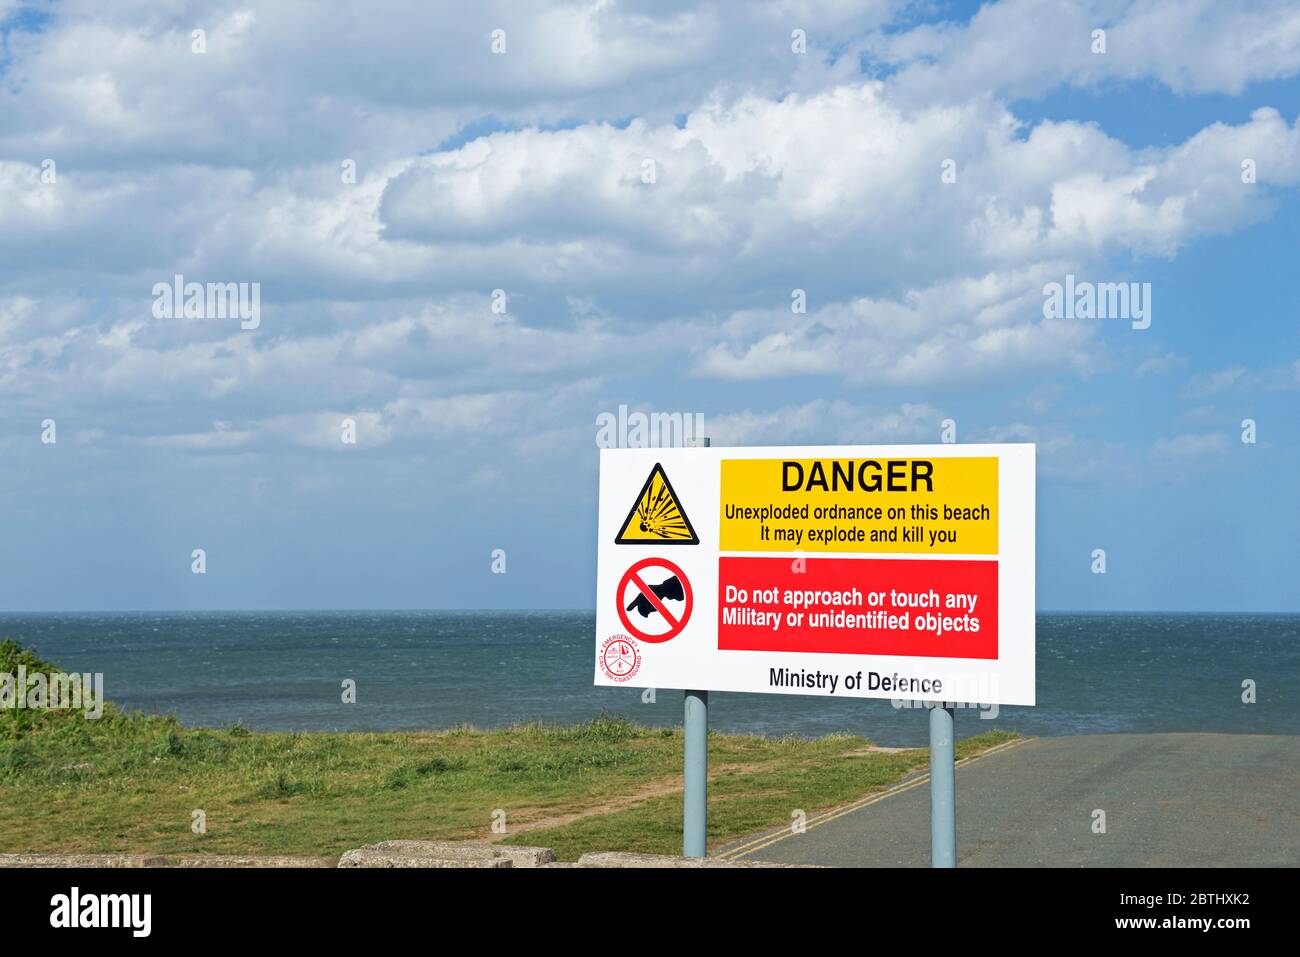 Ministry of Defence notice warning people about unexploded ordnance on the beach at Aldbrough, East Yorkshire, England UK Stock Photo